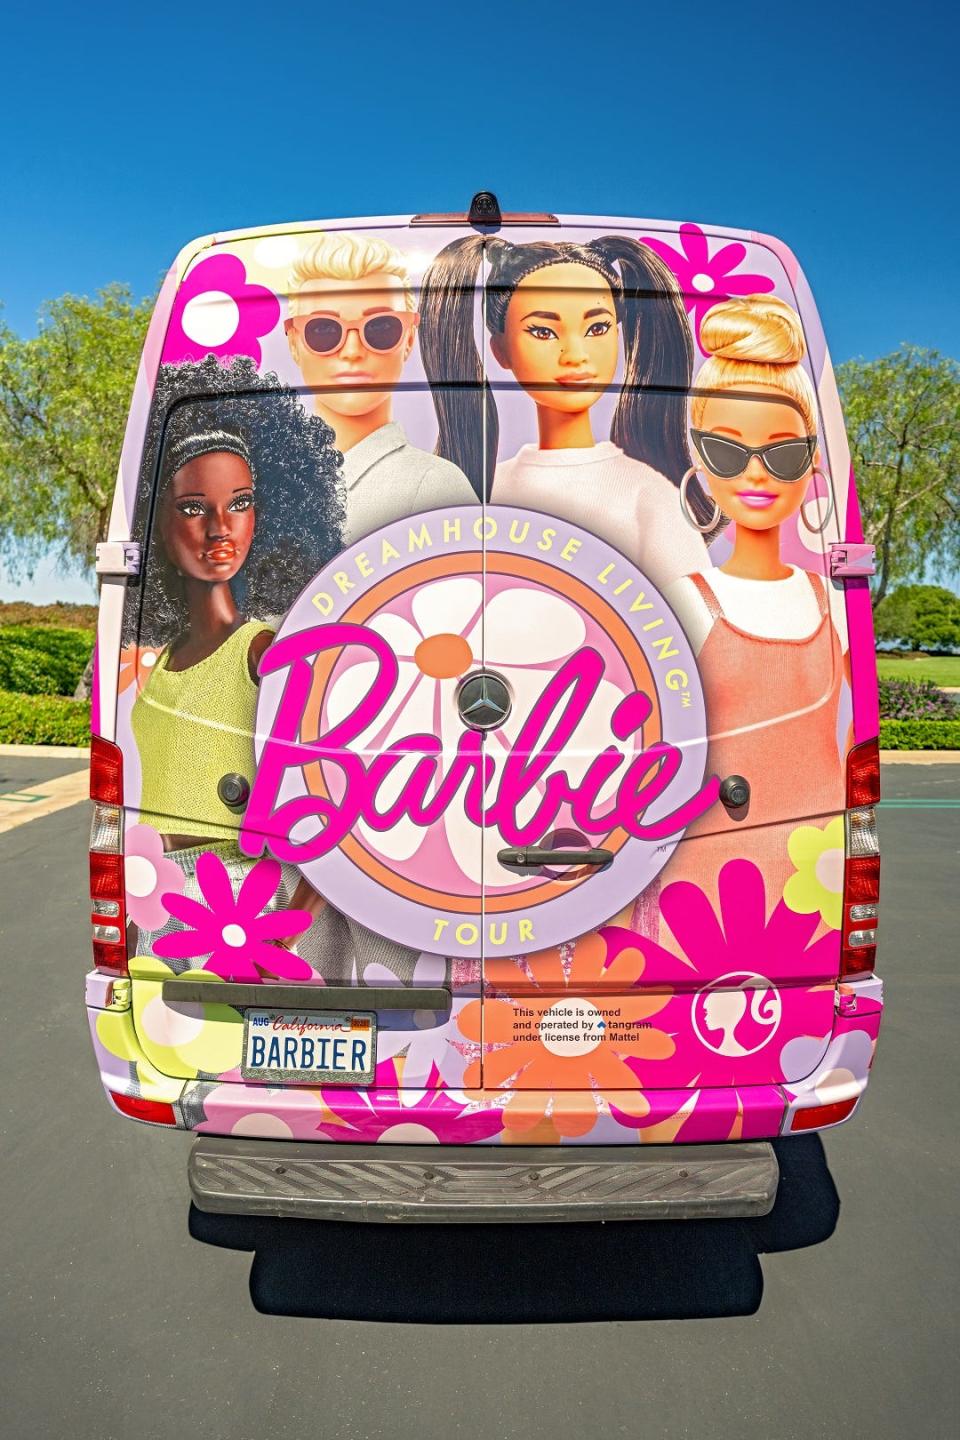 The Barbie truck is coming to New Jersey.